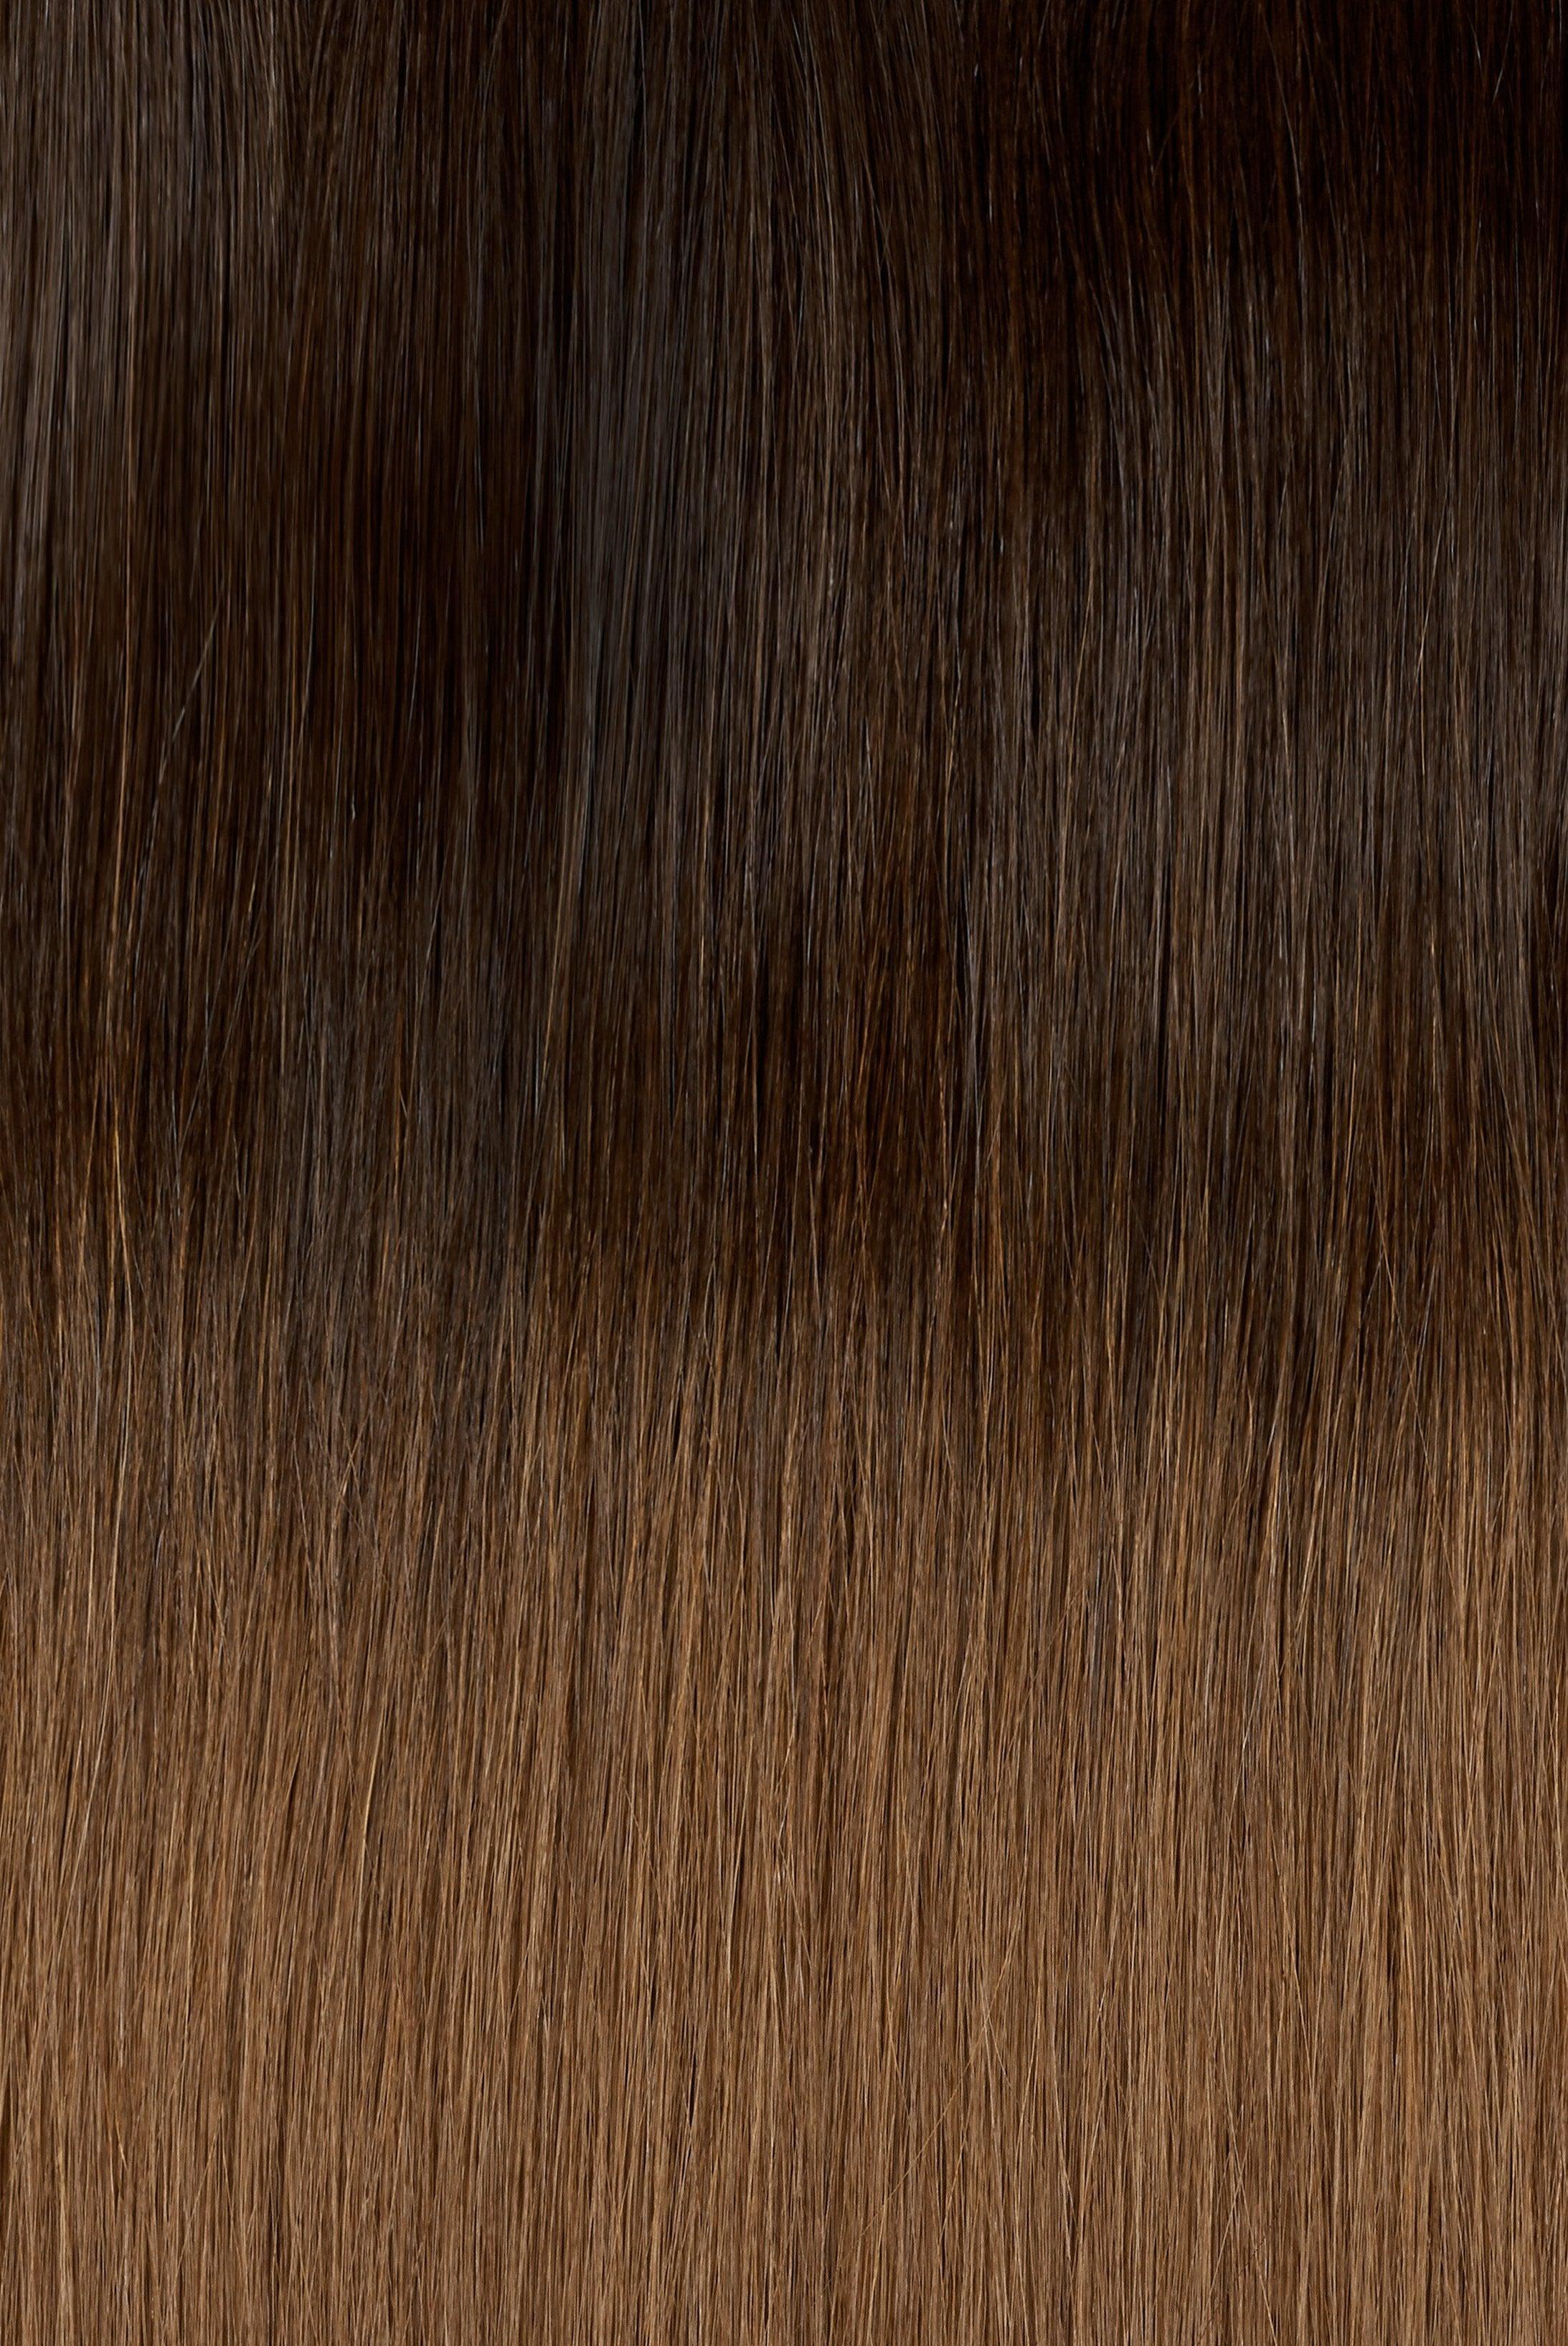 Ombre - Espresso (#1C) to Caramel Brown (#4) 20 – BOMBAY HAIR